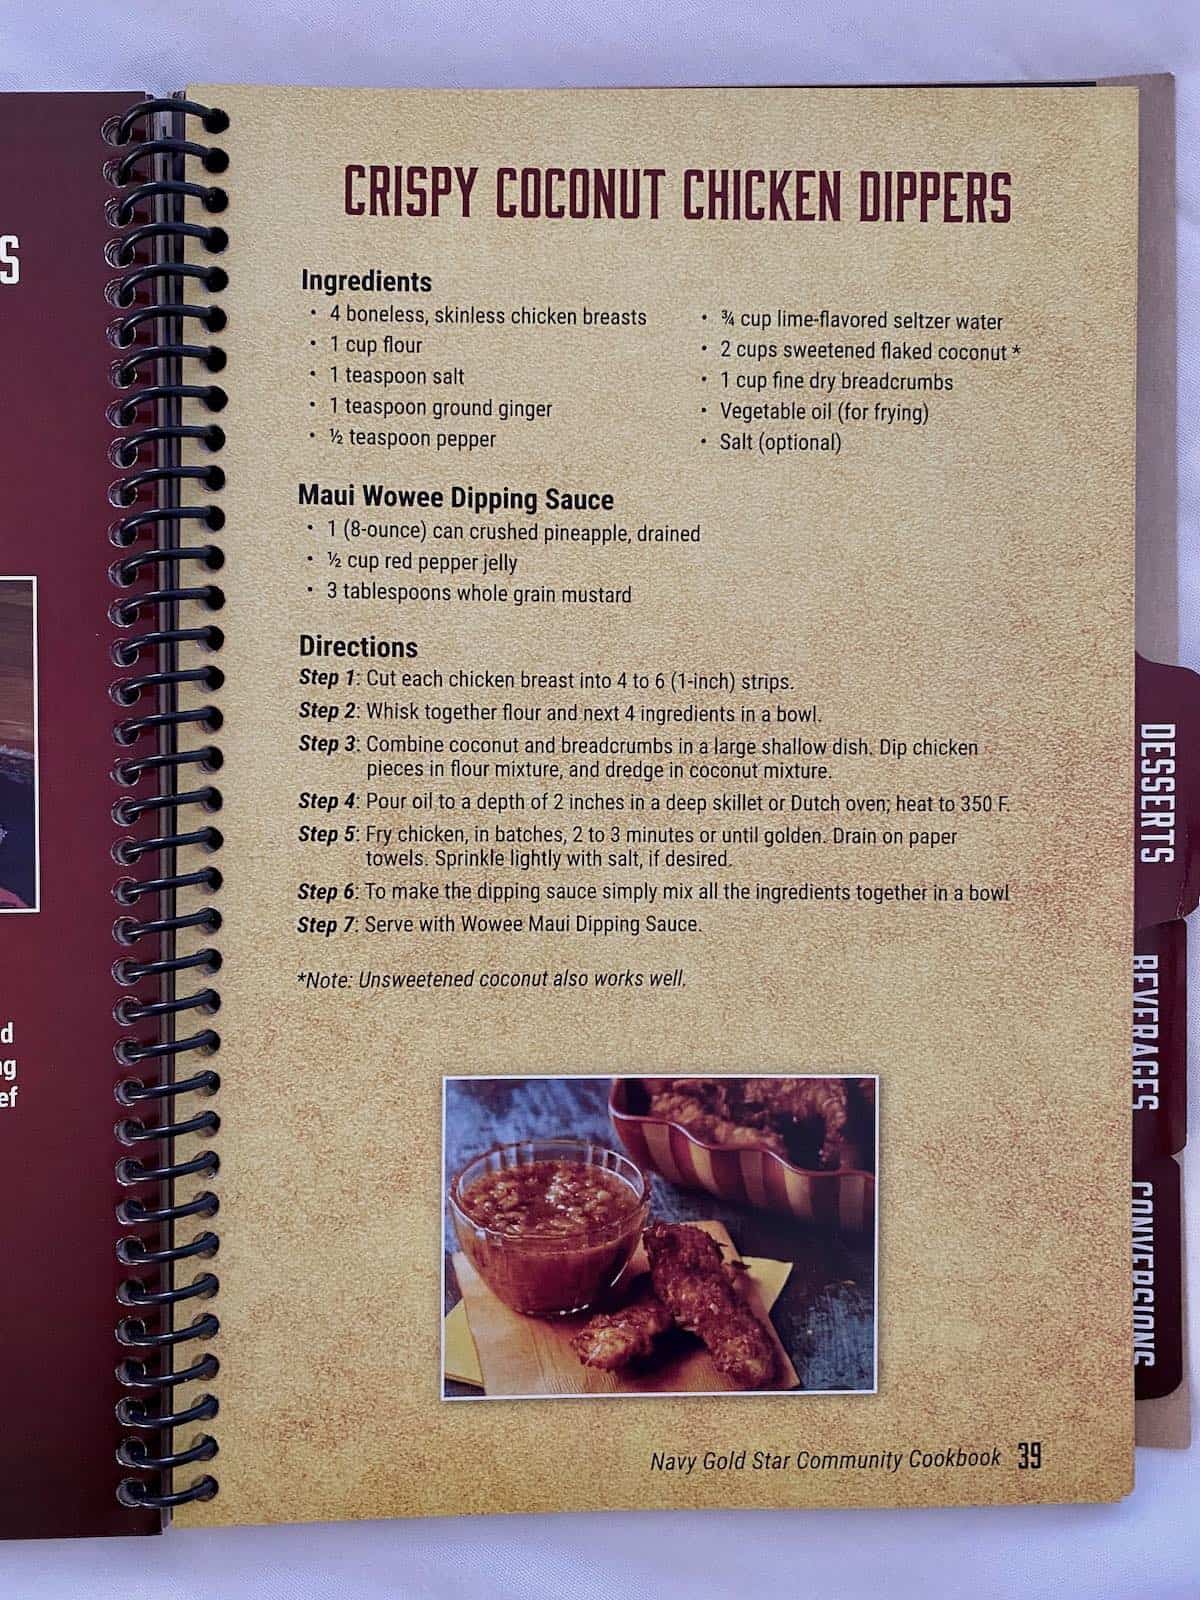 recipe page in the cookbook for crispy coconut chicken dippers